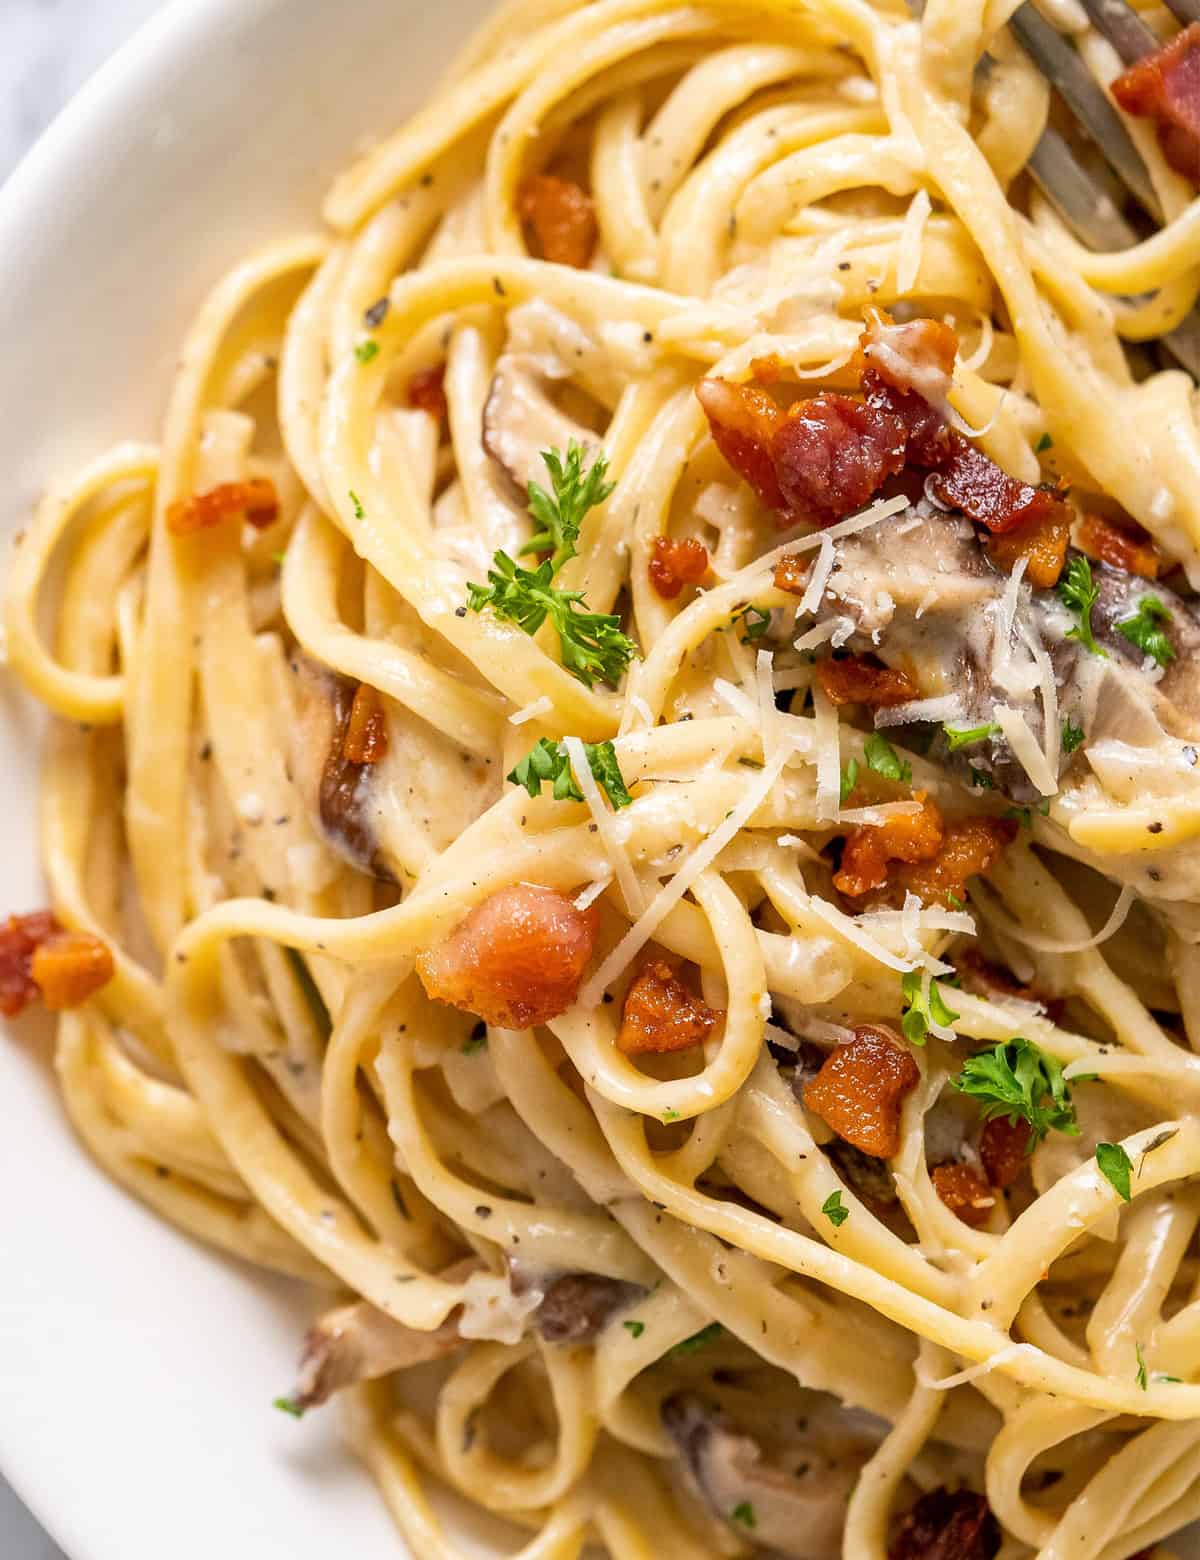 Creamy Mushroom Pasta is loaded with golden brown seared mushrooms and smothered in a silky and oh so creamy garlic parmesan sauce. With two simple swaps it can be made vegetarian, and while it's really easy to make, it looks (and tastes) fancy enough for a special occasion dinner!